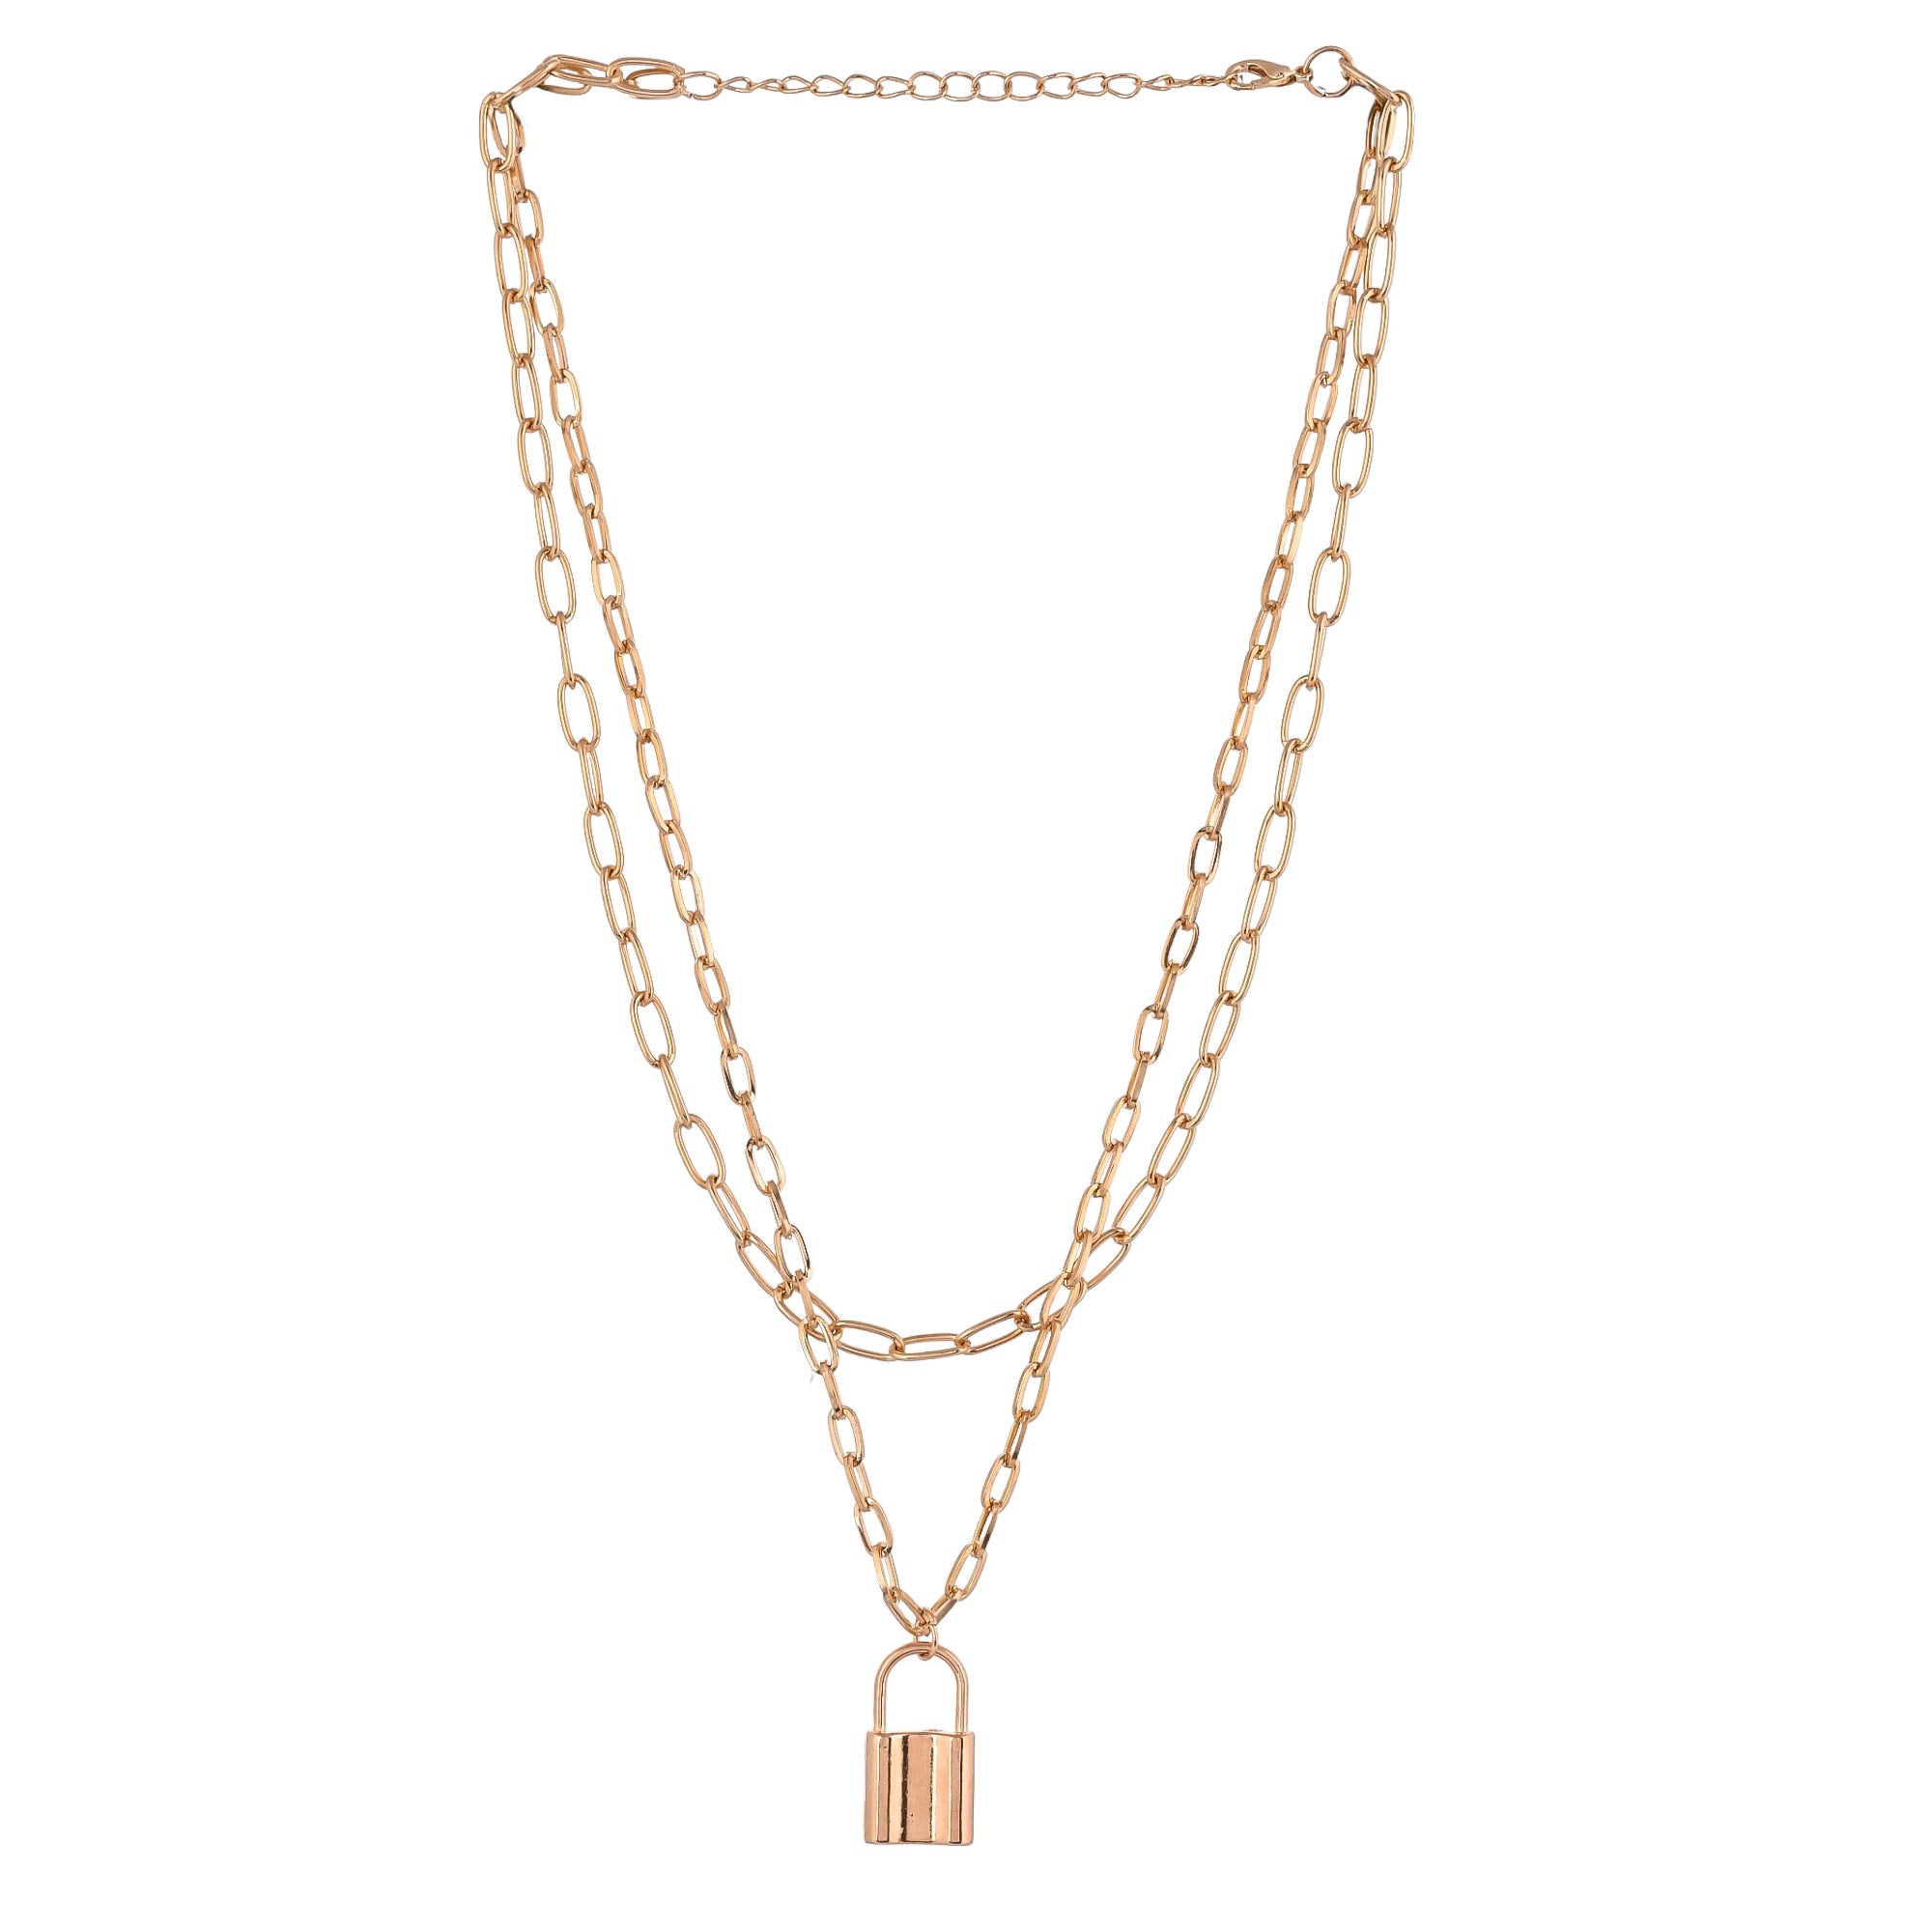 Rocksbox: 3 Layer Necklace with Lock Charm by 8 Other Reasons